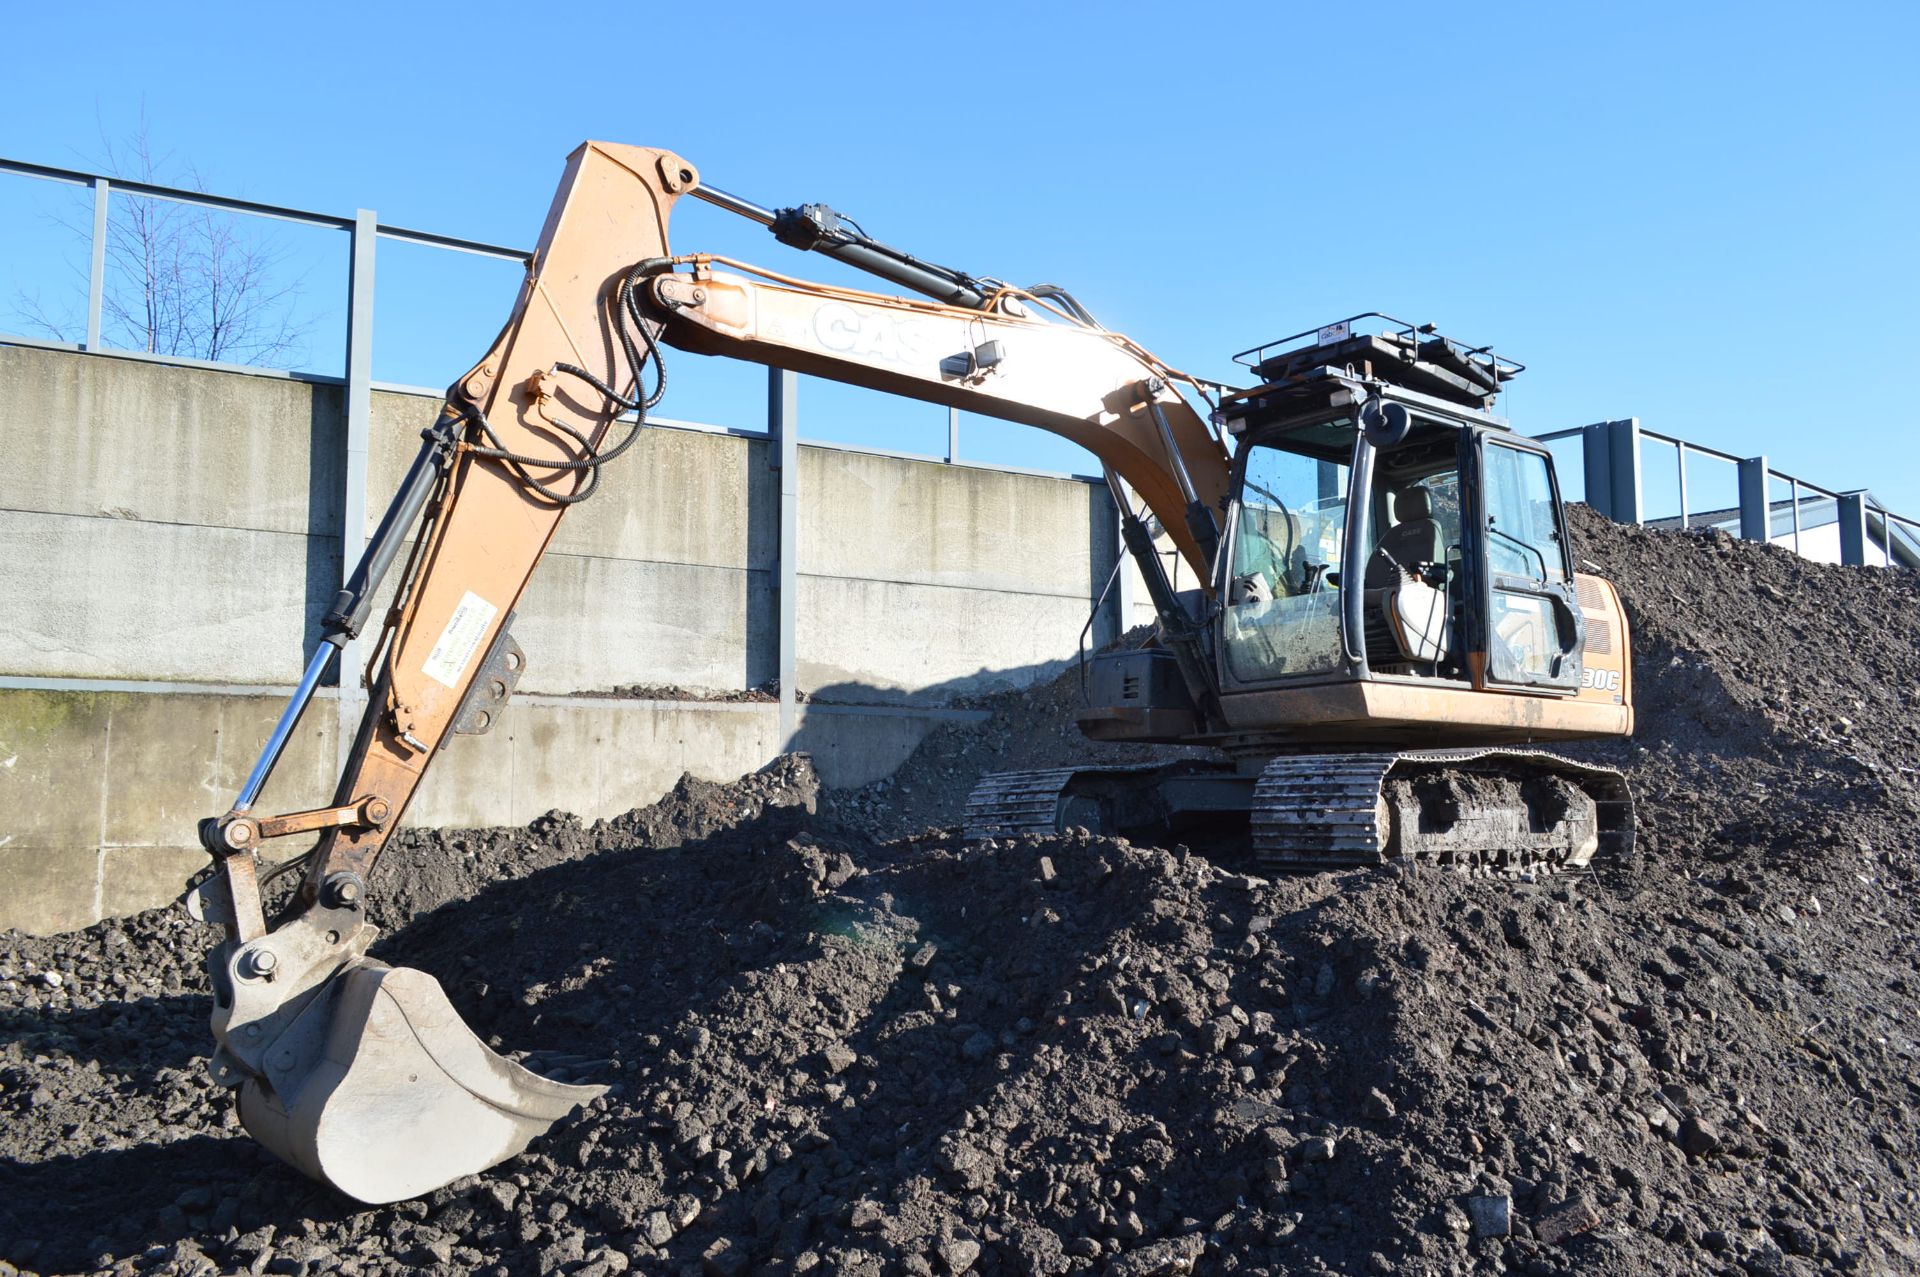 Case CX130C TRACKED EXCAVATOR, PIN DCH130R6NFF6D1430, year of manufacture 2014, 13900kg operating - Image 3 of 3